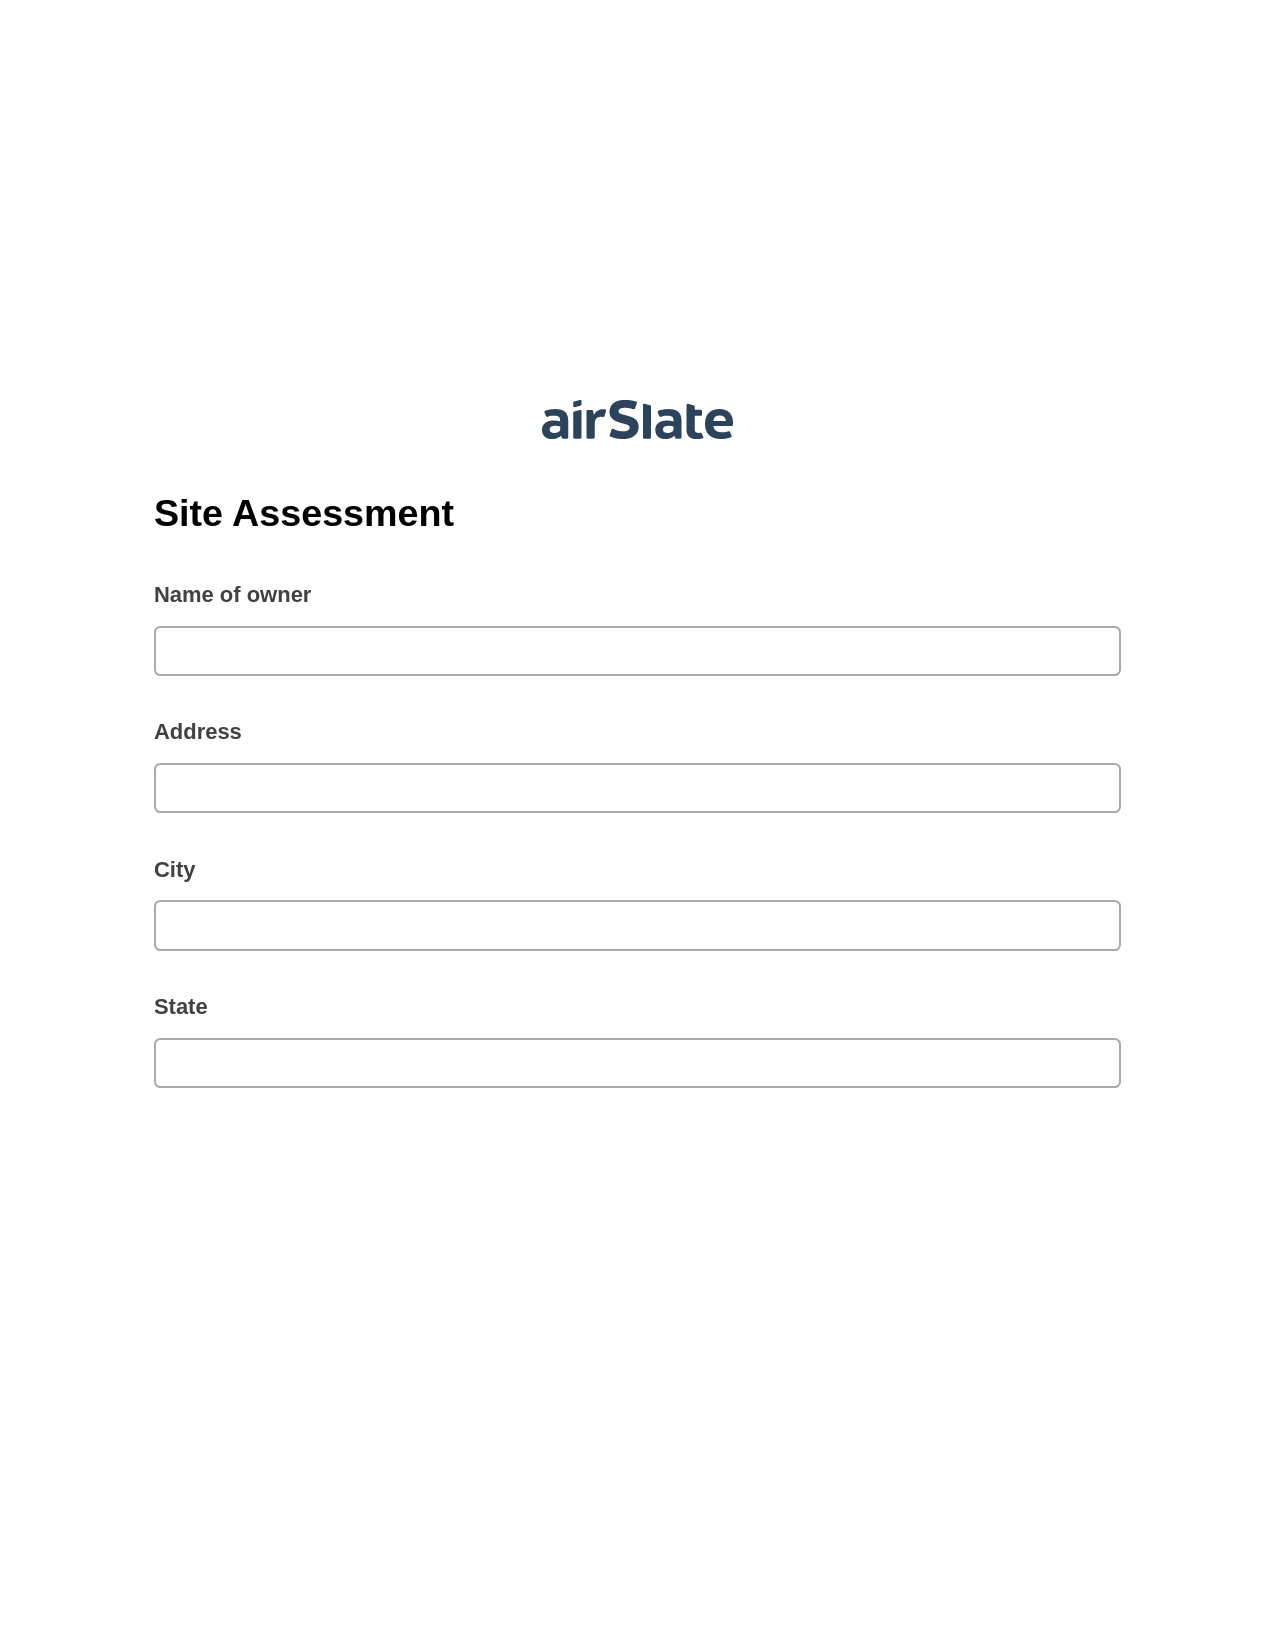 Site Assessment Pre-fill Dropdown from Airtable, Send a Slate with Roles Bot, Email Notification Postfinish Bot